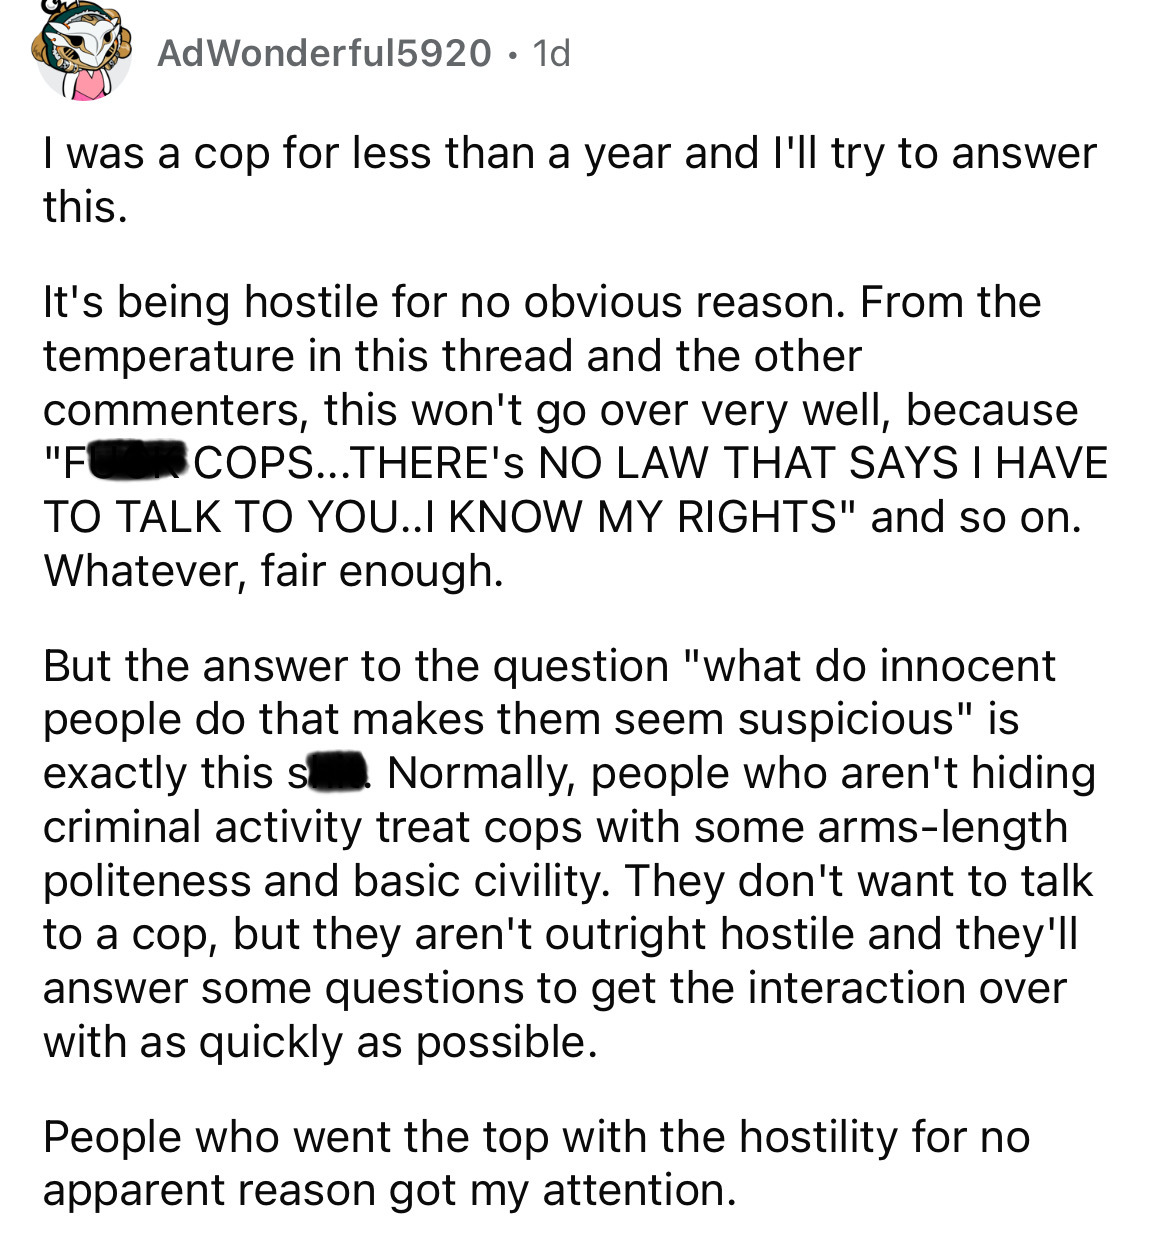 number - AdWonderful5920 1d I was a cop for less than a year and I'll try to answer this. It's being hostile for no obvious reason. From the temperature in this thread and the other "F commenters, this won't go over very well, because Cops...There'S No La